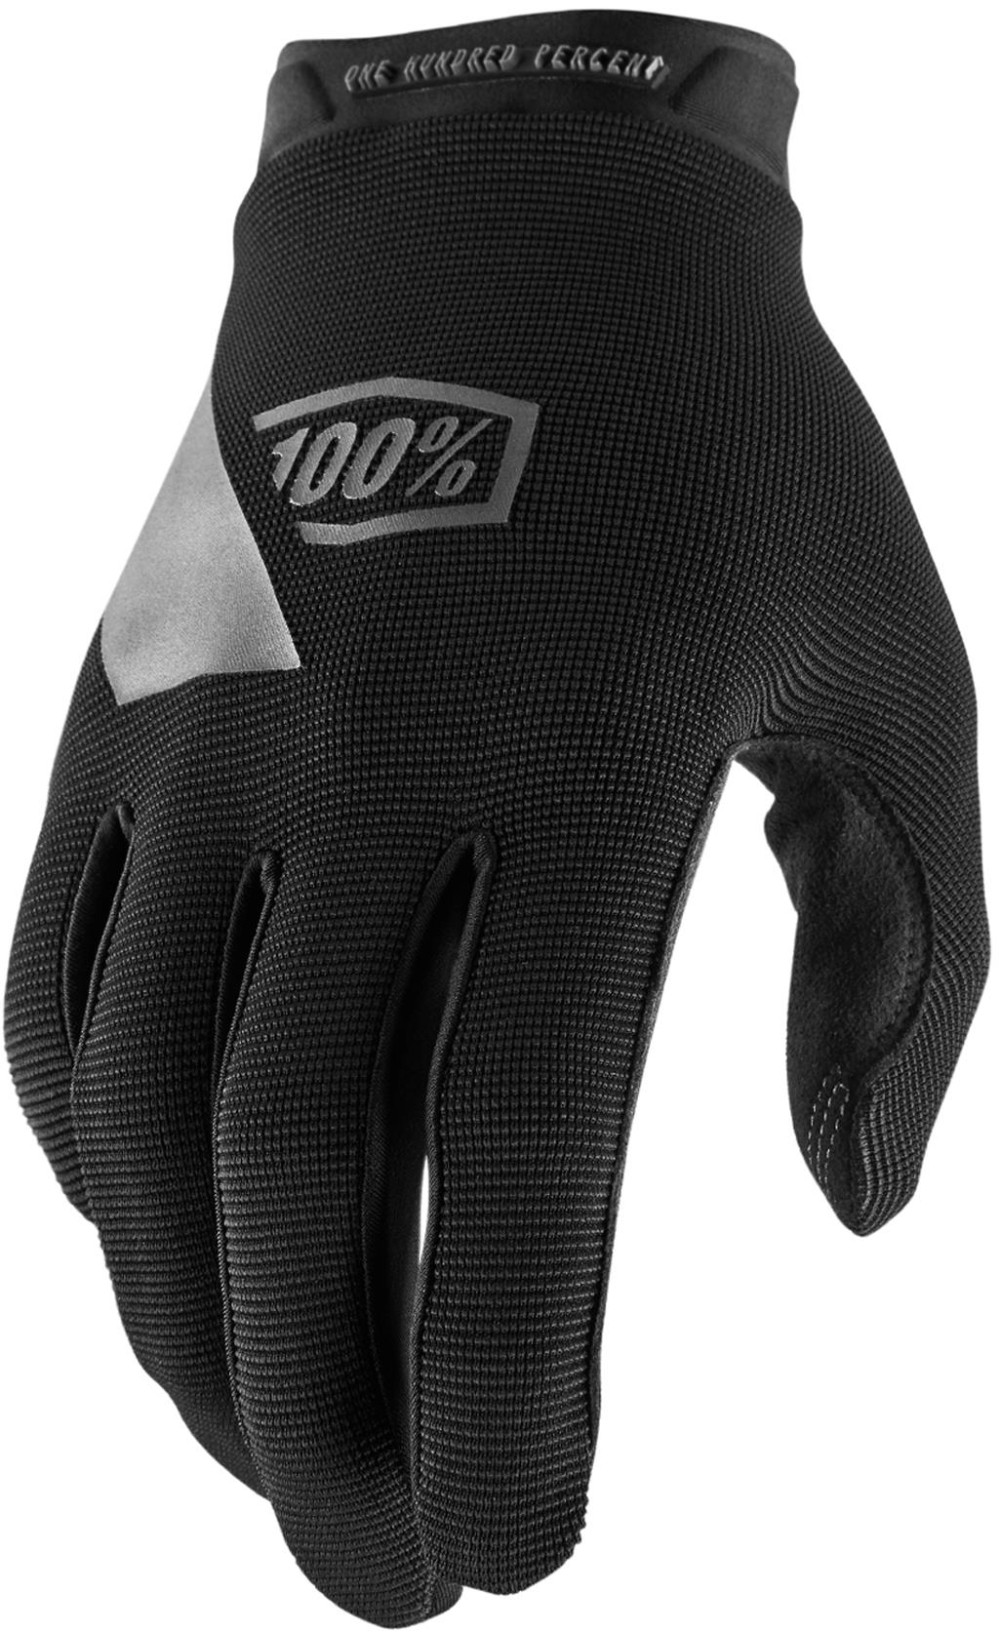 Ridecamp Youth Long Finger MTB Cycling Gloves image 0